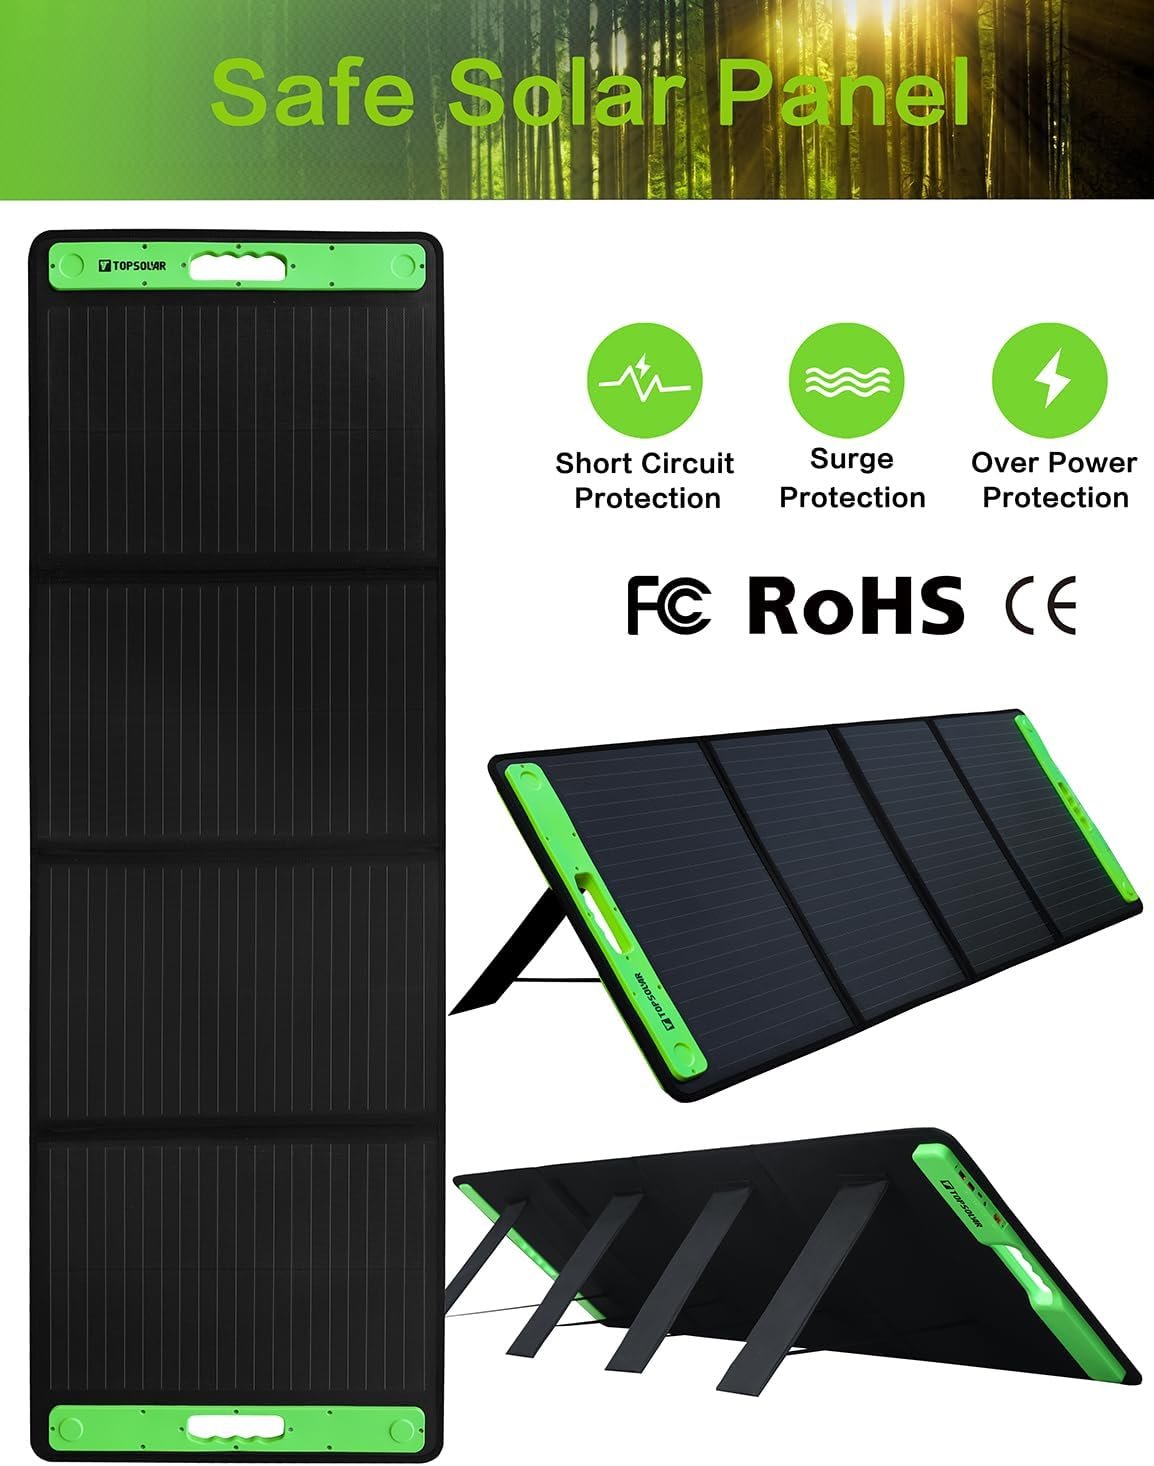 Topsolar 200W Foldable Portable Solar Panel Charger Review